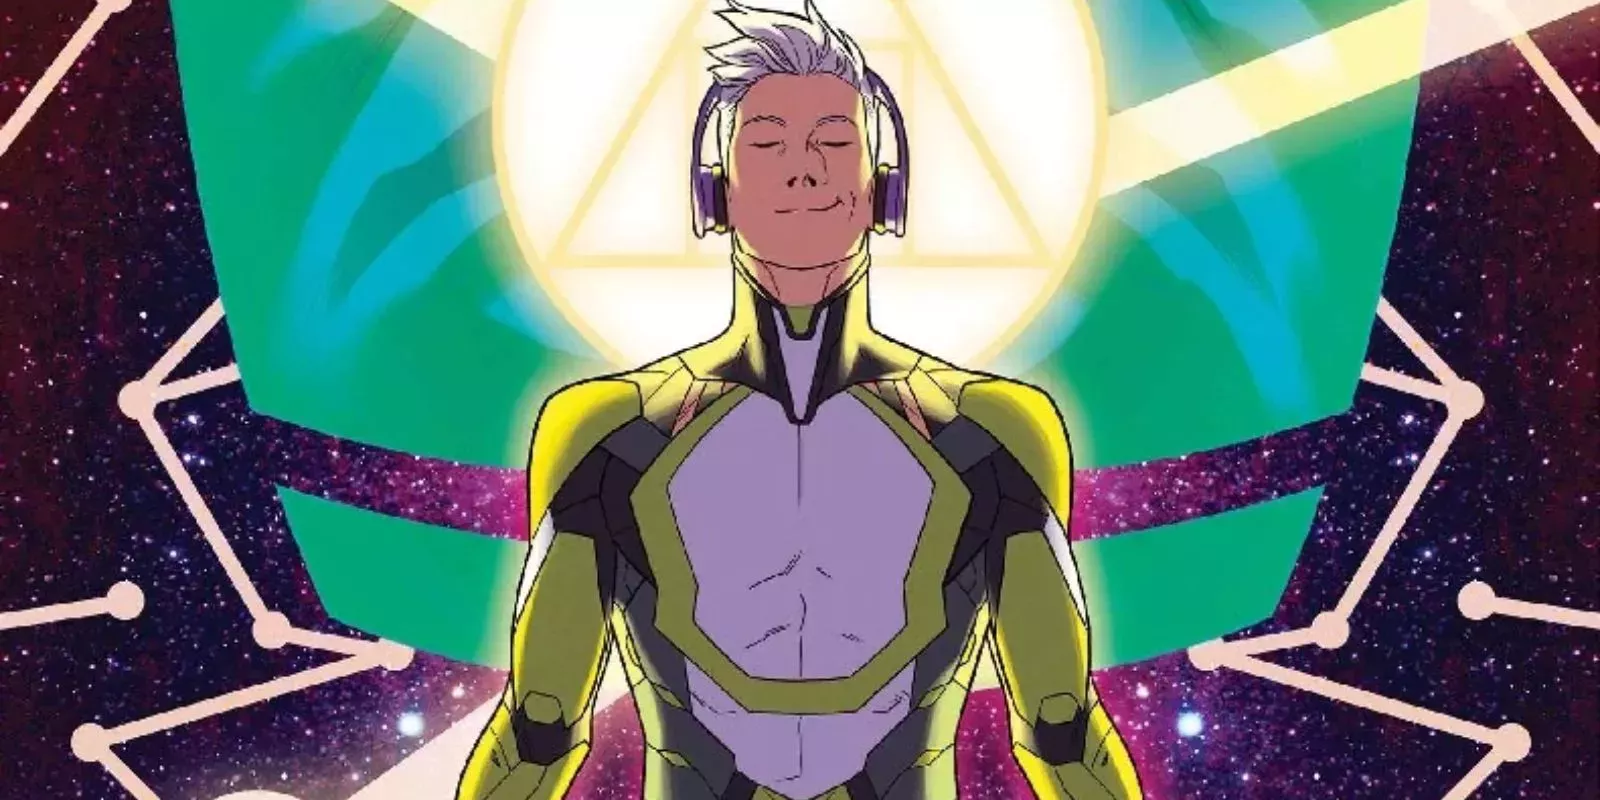 Noh-Varr Captain Marvel with headphones on from Marvel Comics.